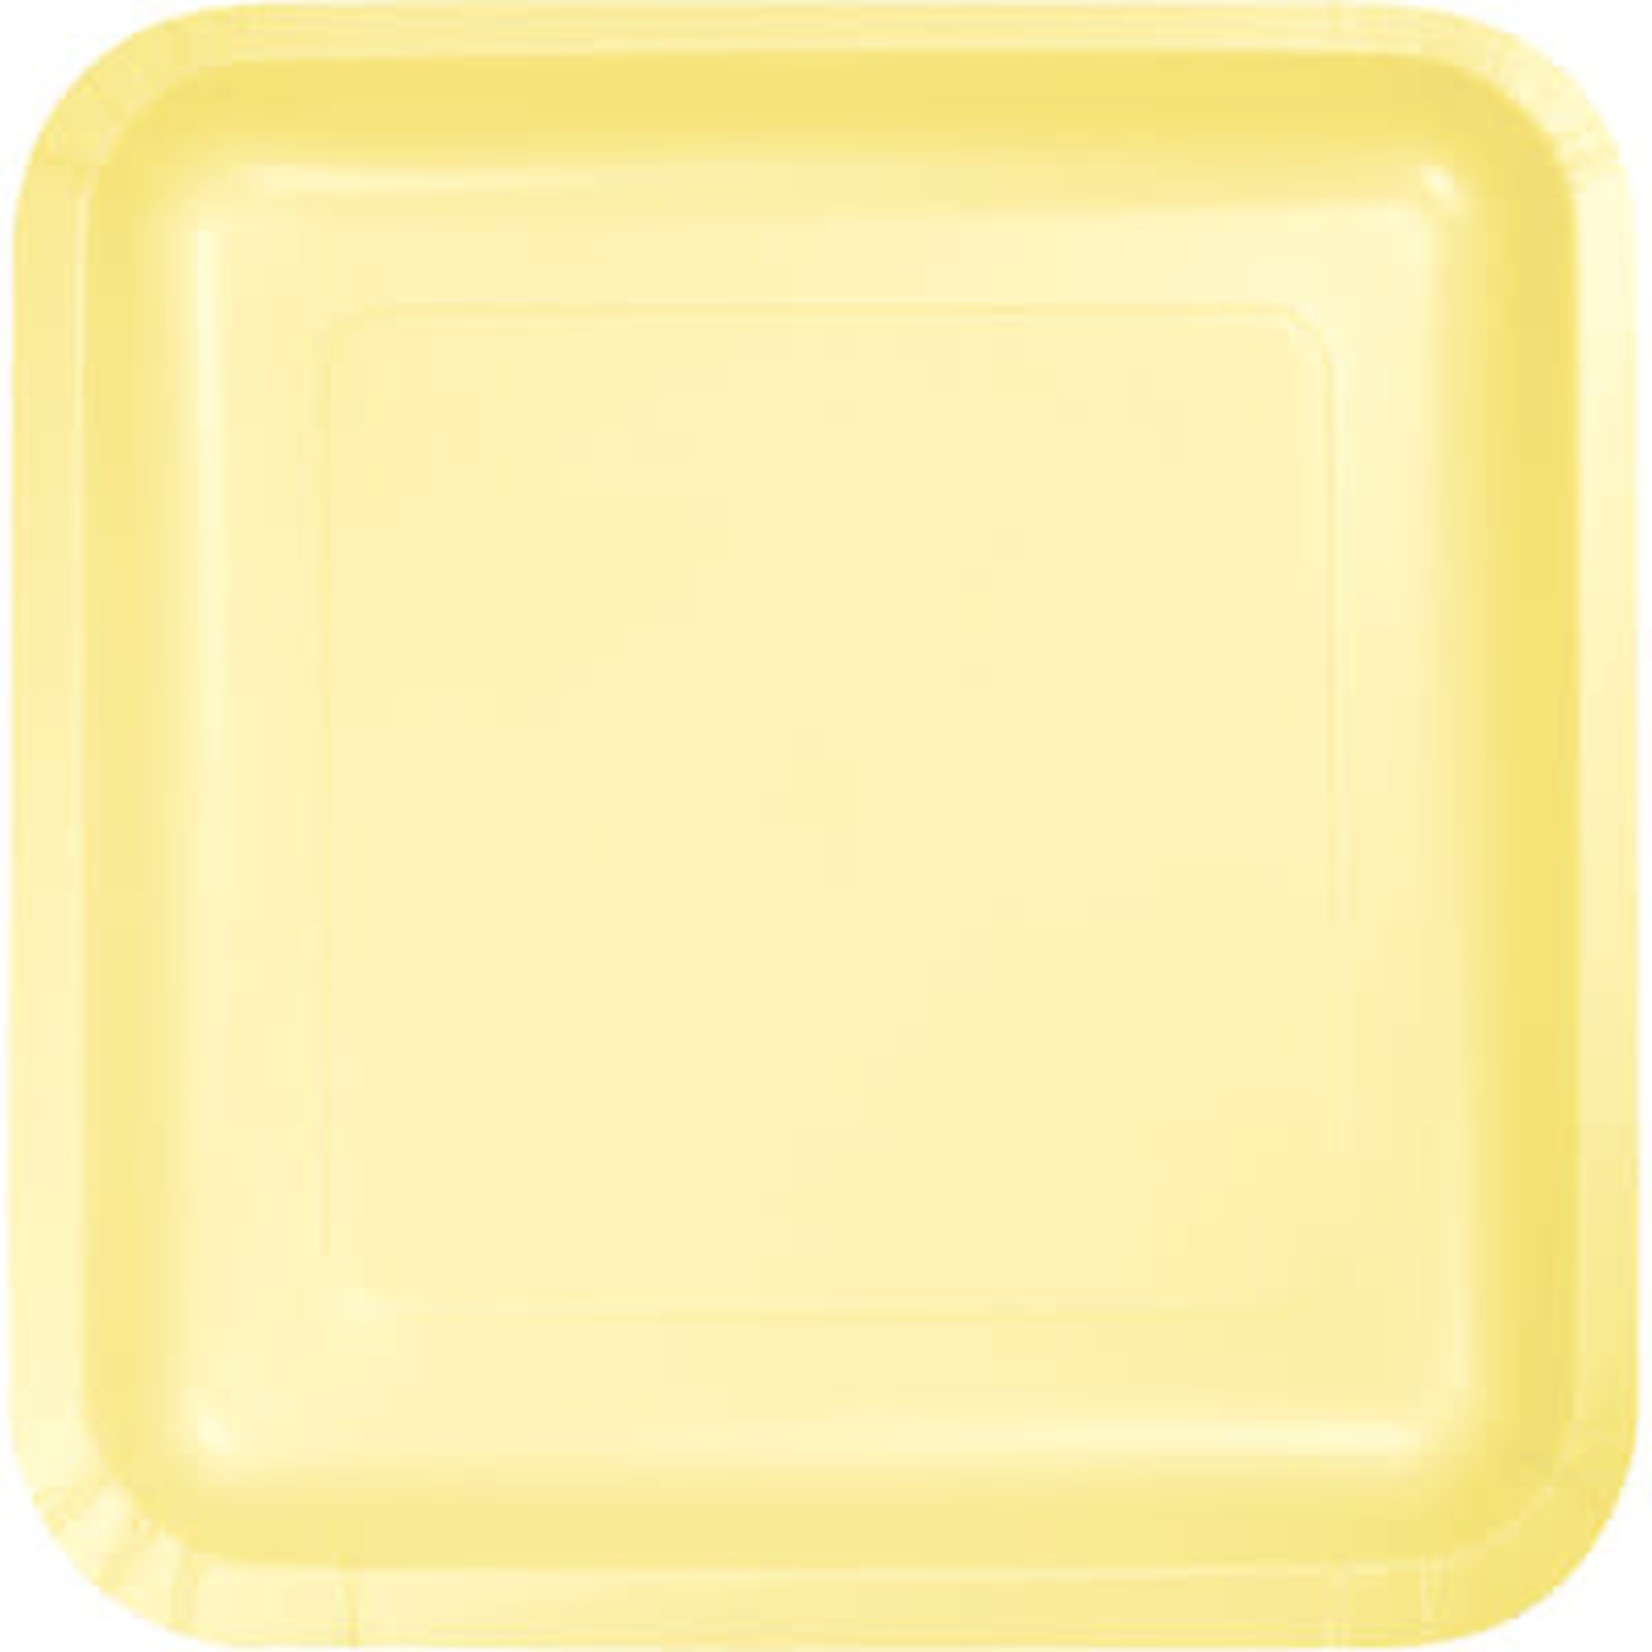 Touch of Color 7" Mimosa Yellow Square Paper Plates - 18ct.